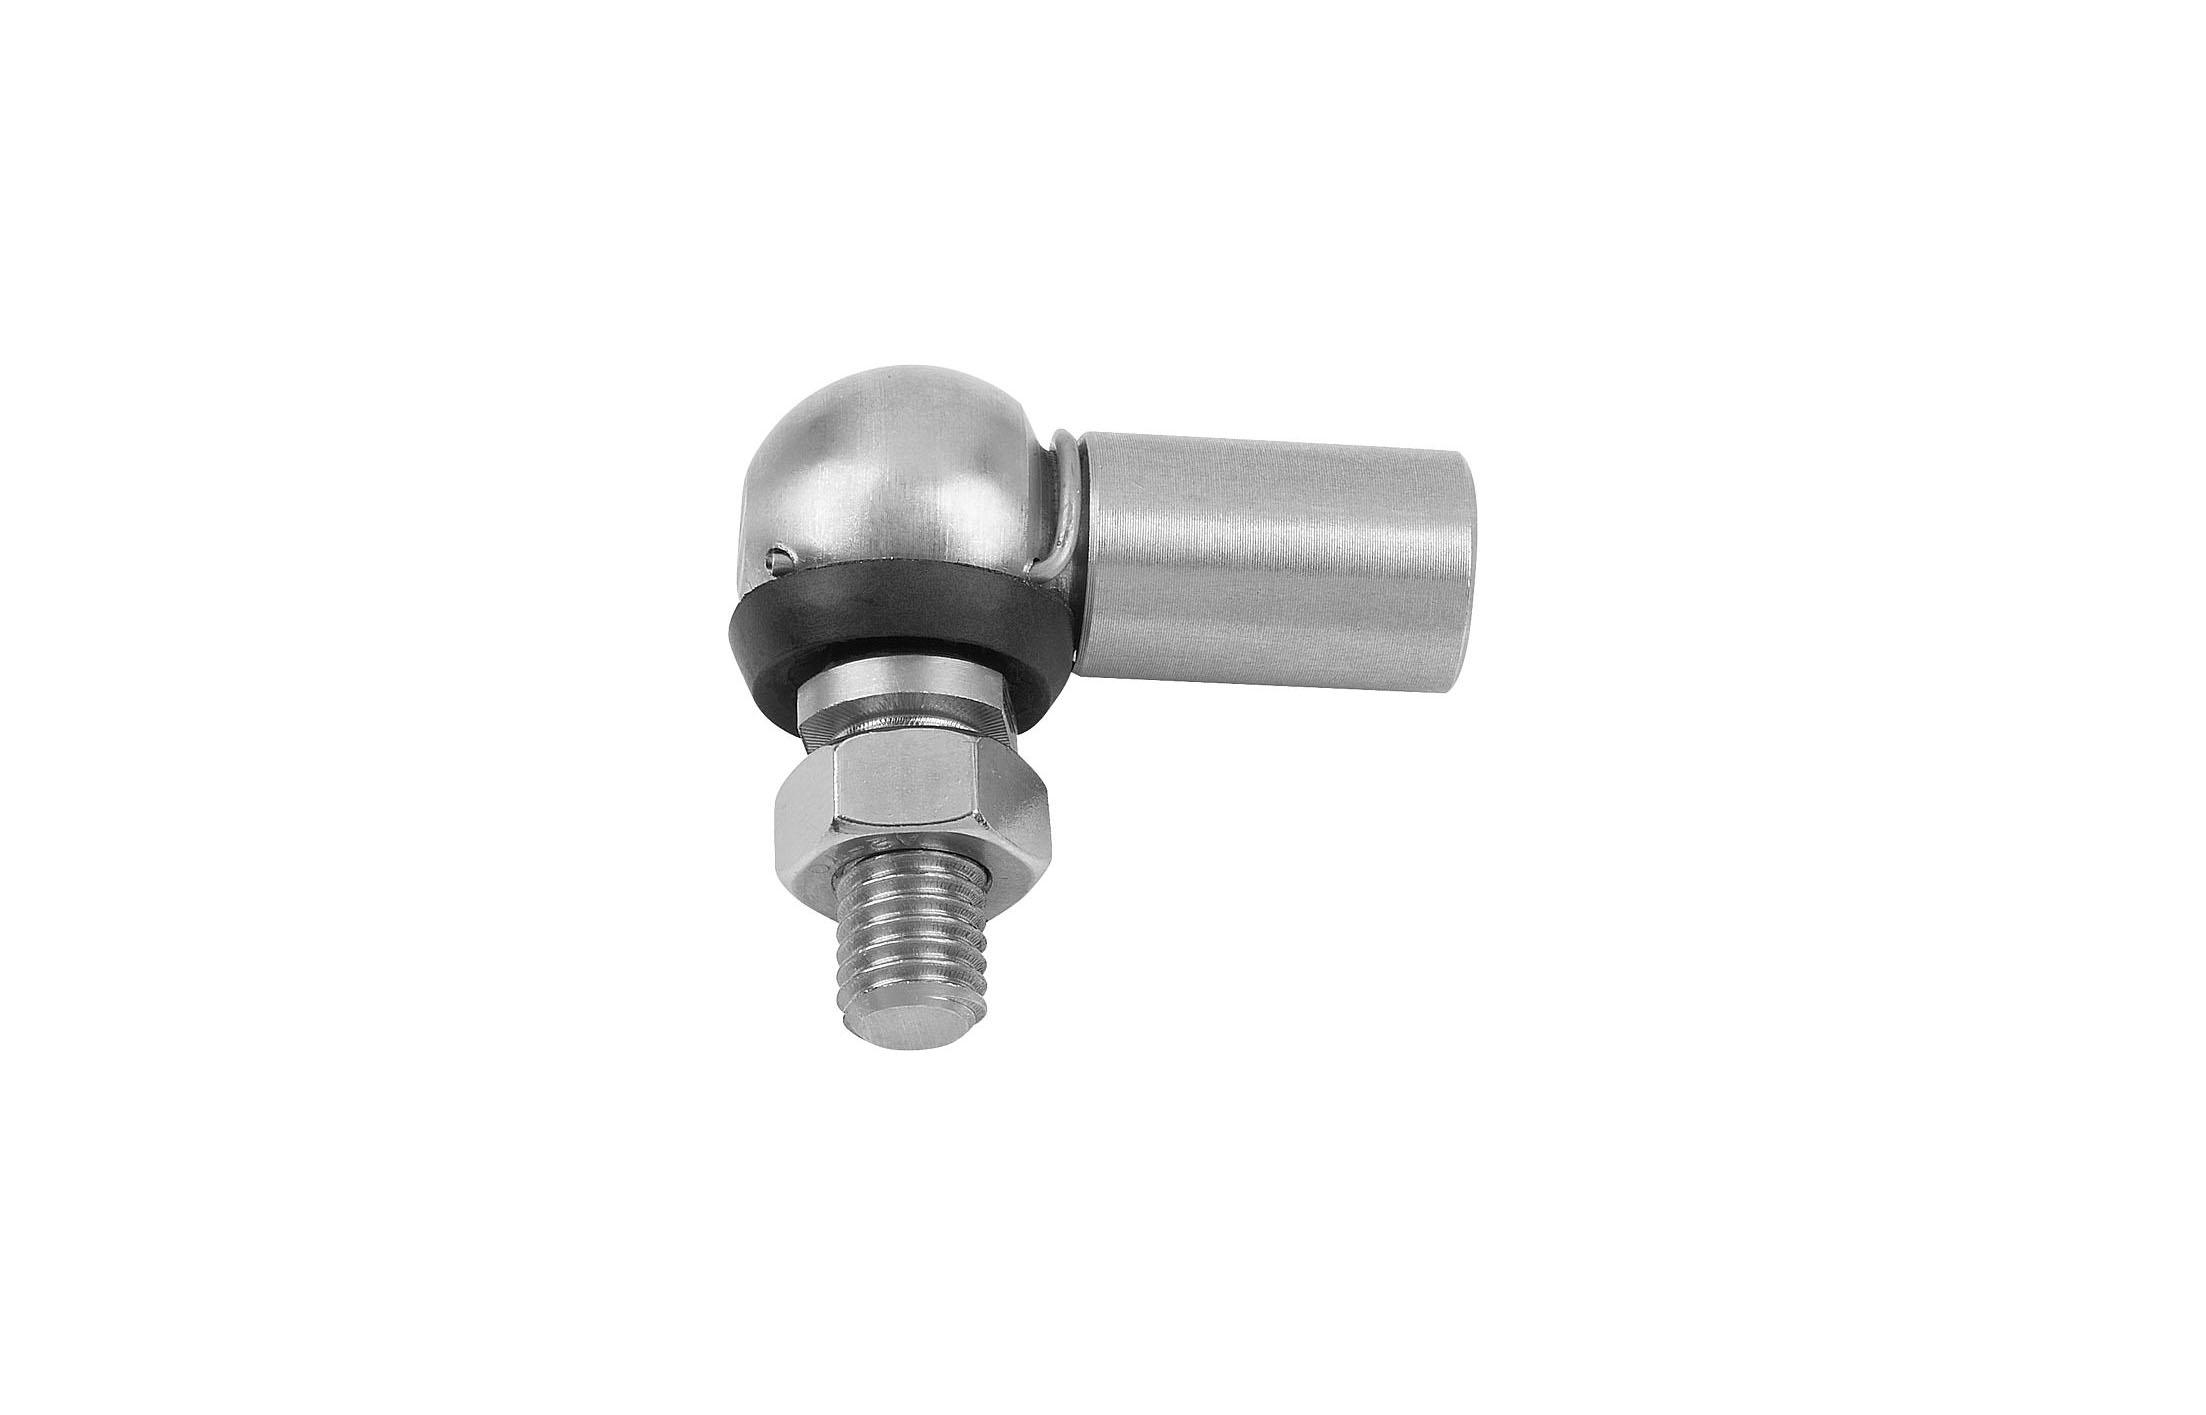 K0734 Angle joints stainless steel like DIN 71802, Style CS with sealing cap